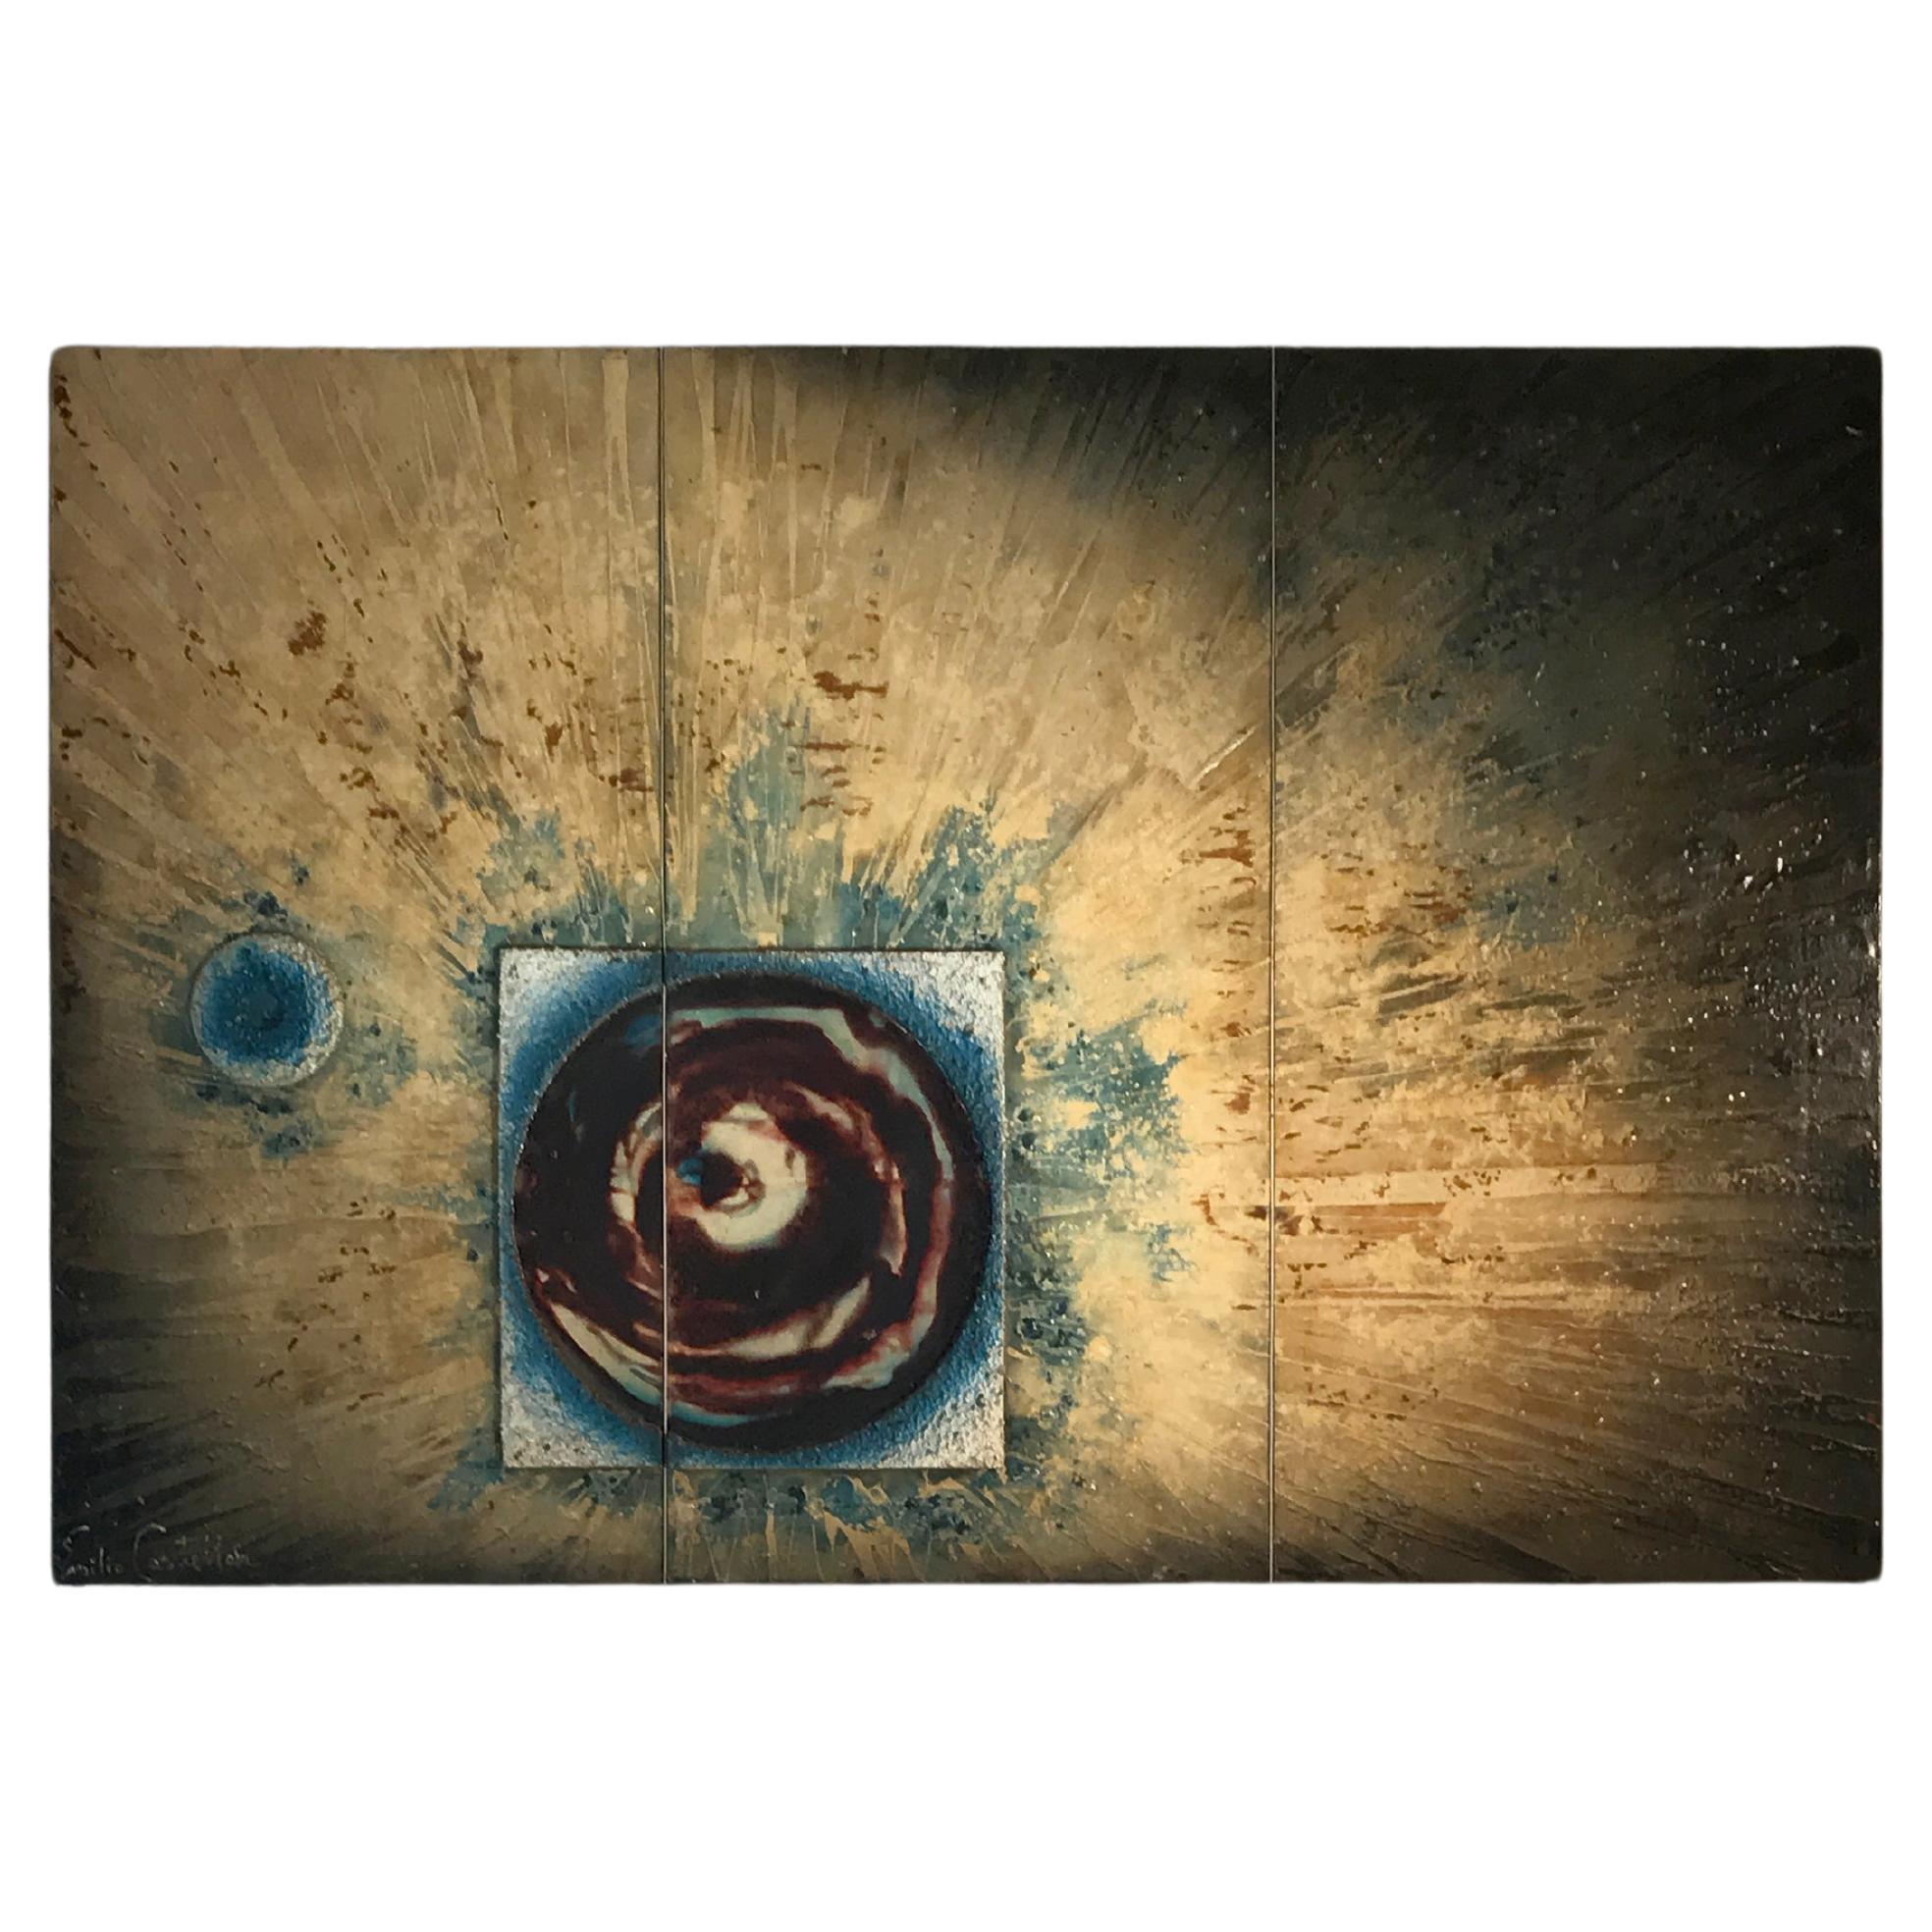 An authentic and important psychedelic triptych painting, Abstract, Op-Art, Space-Age, hypnotic and dynamic composition of yellowish and brown tones, with galactic circles in relief enhanced by cyan areas, entitled 